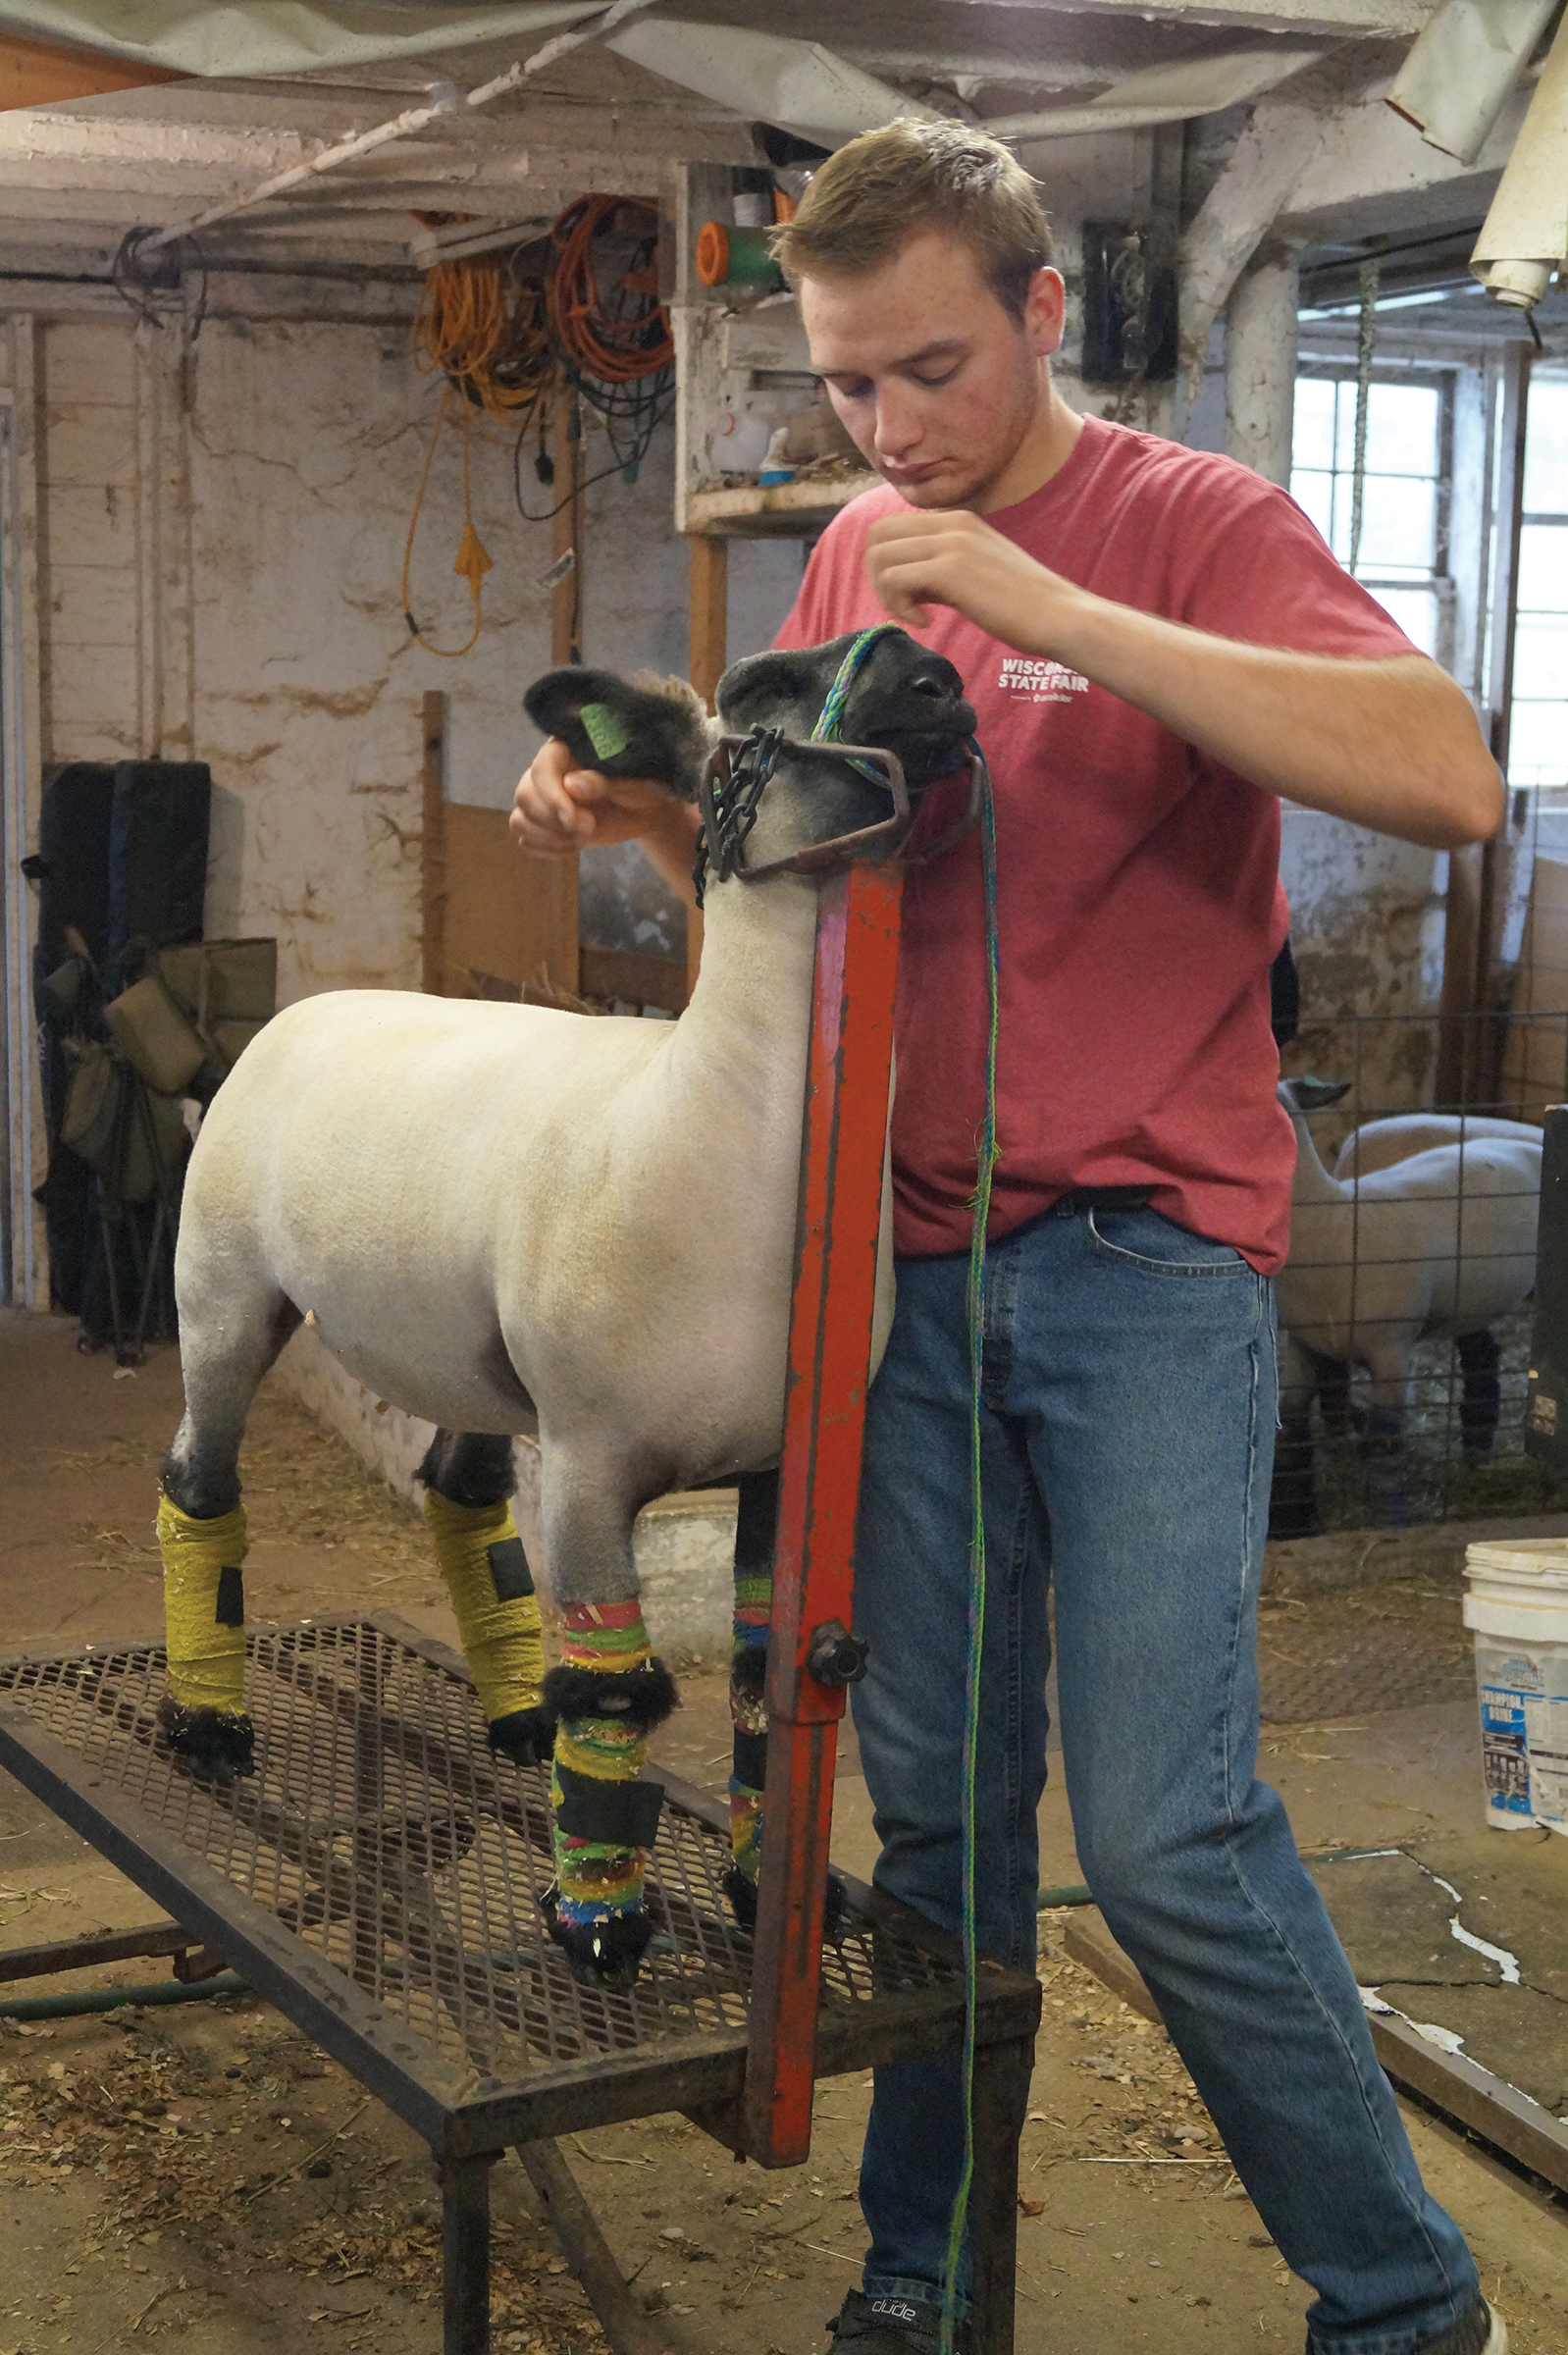 Tim prepares one of his animals for grooming in the basement of the remodeled dairy barn.